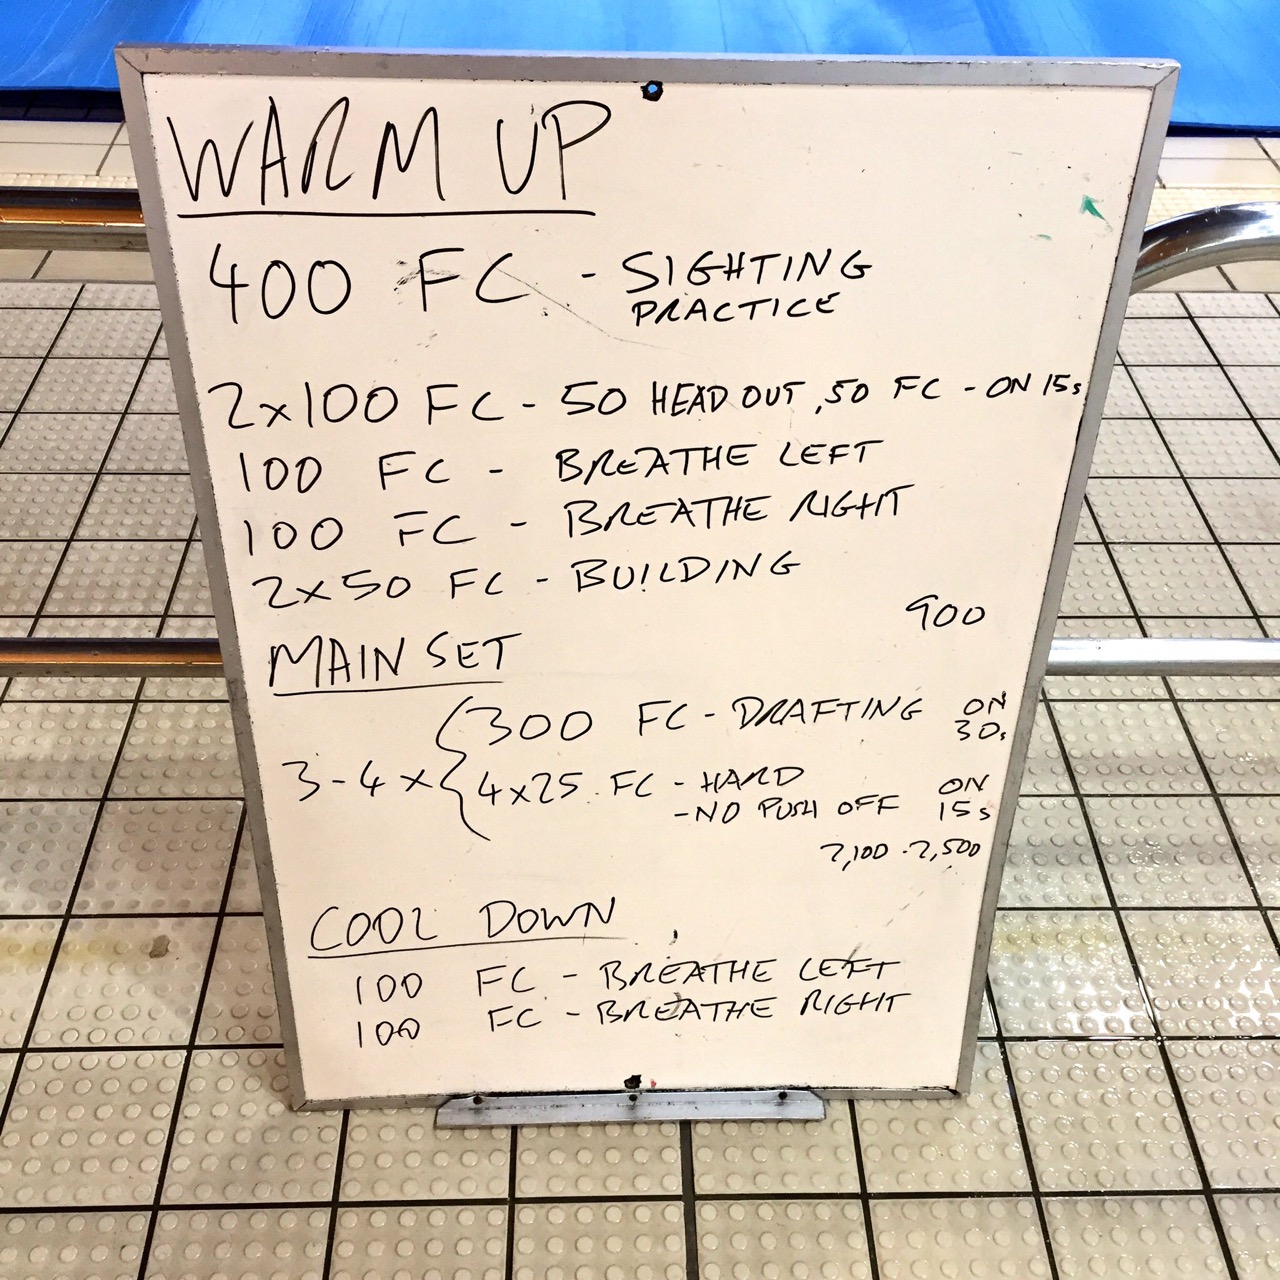 A Fun, Yet Crushing 20 Minute Set for Drop Dead Sprinters 